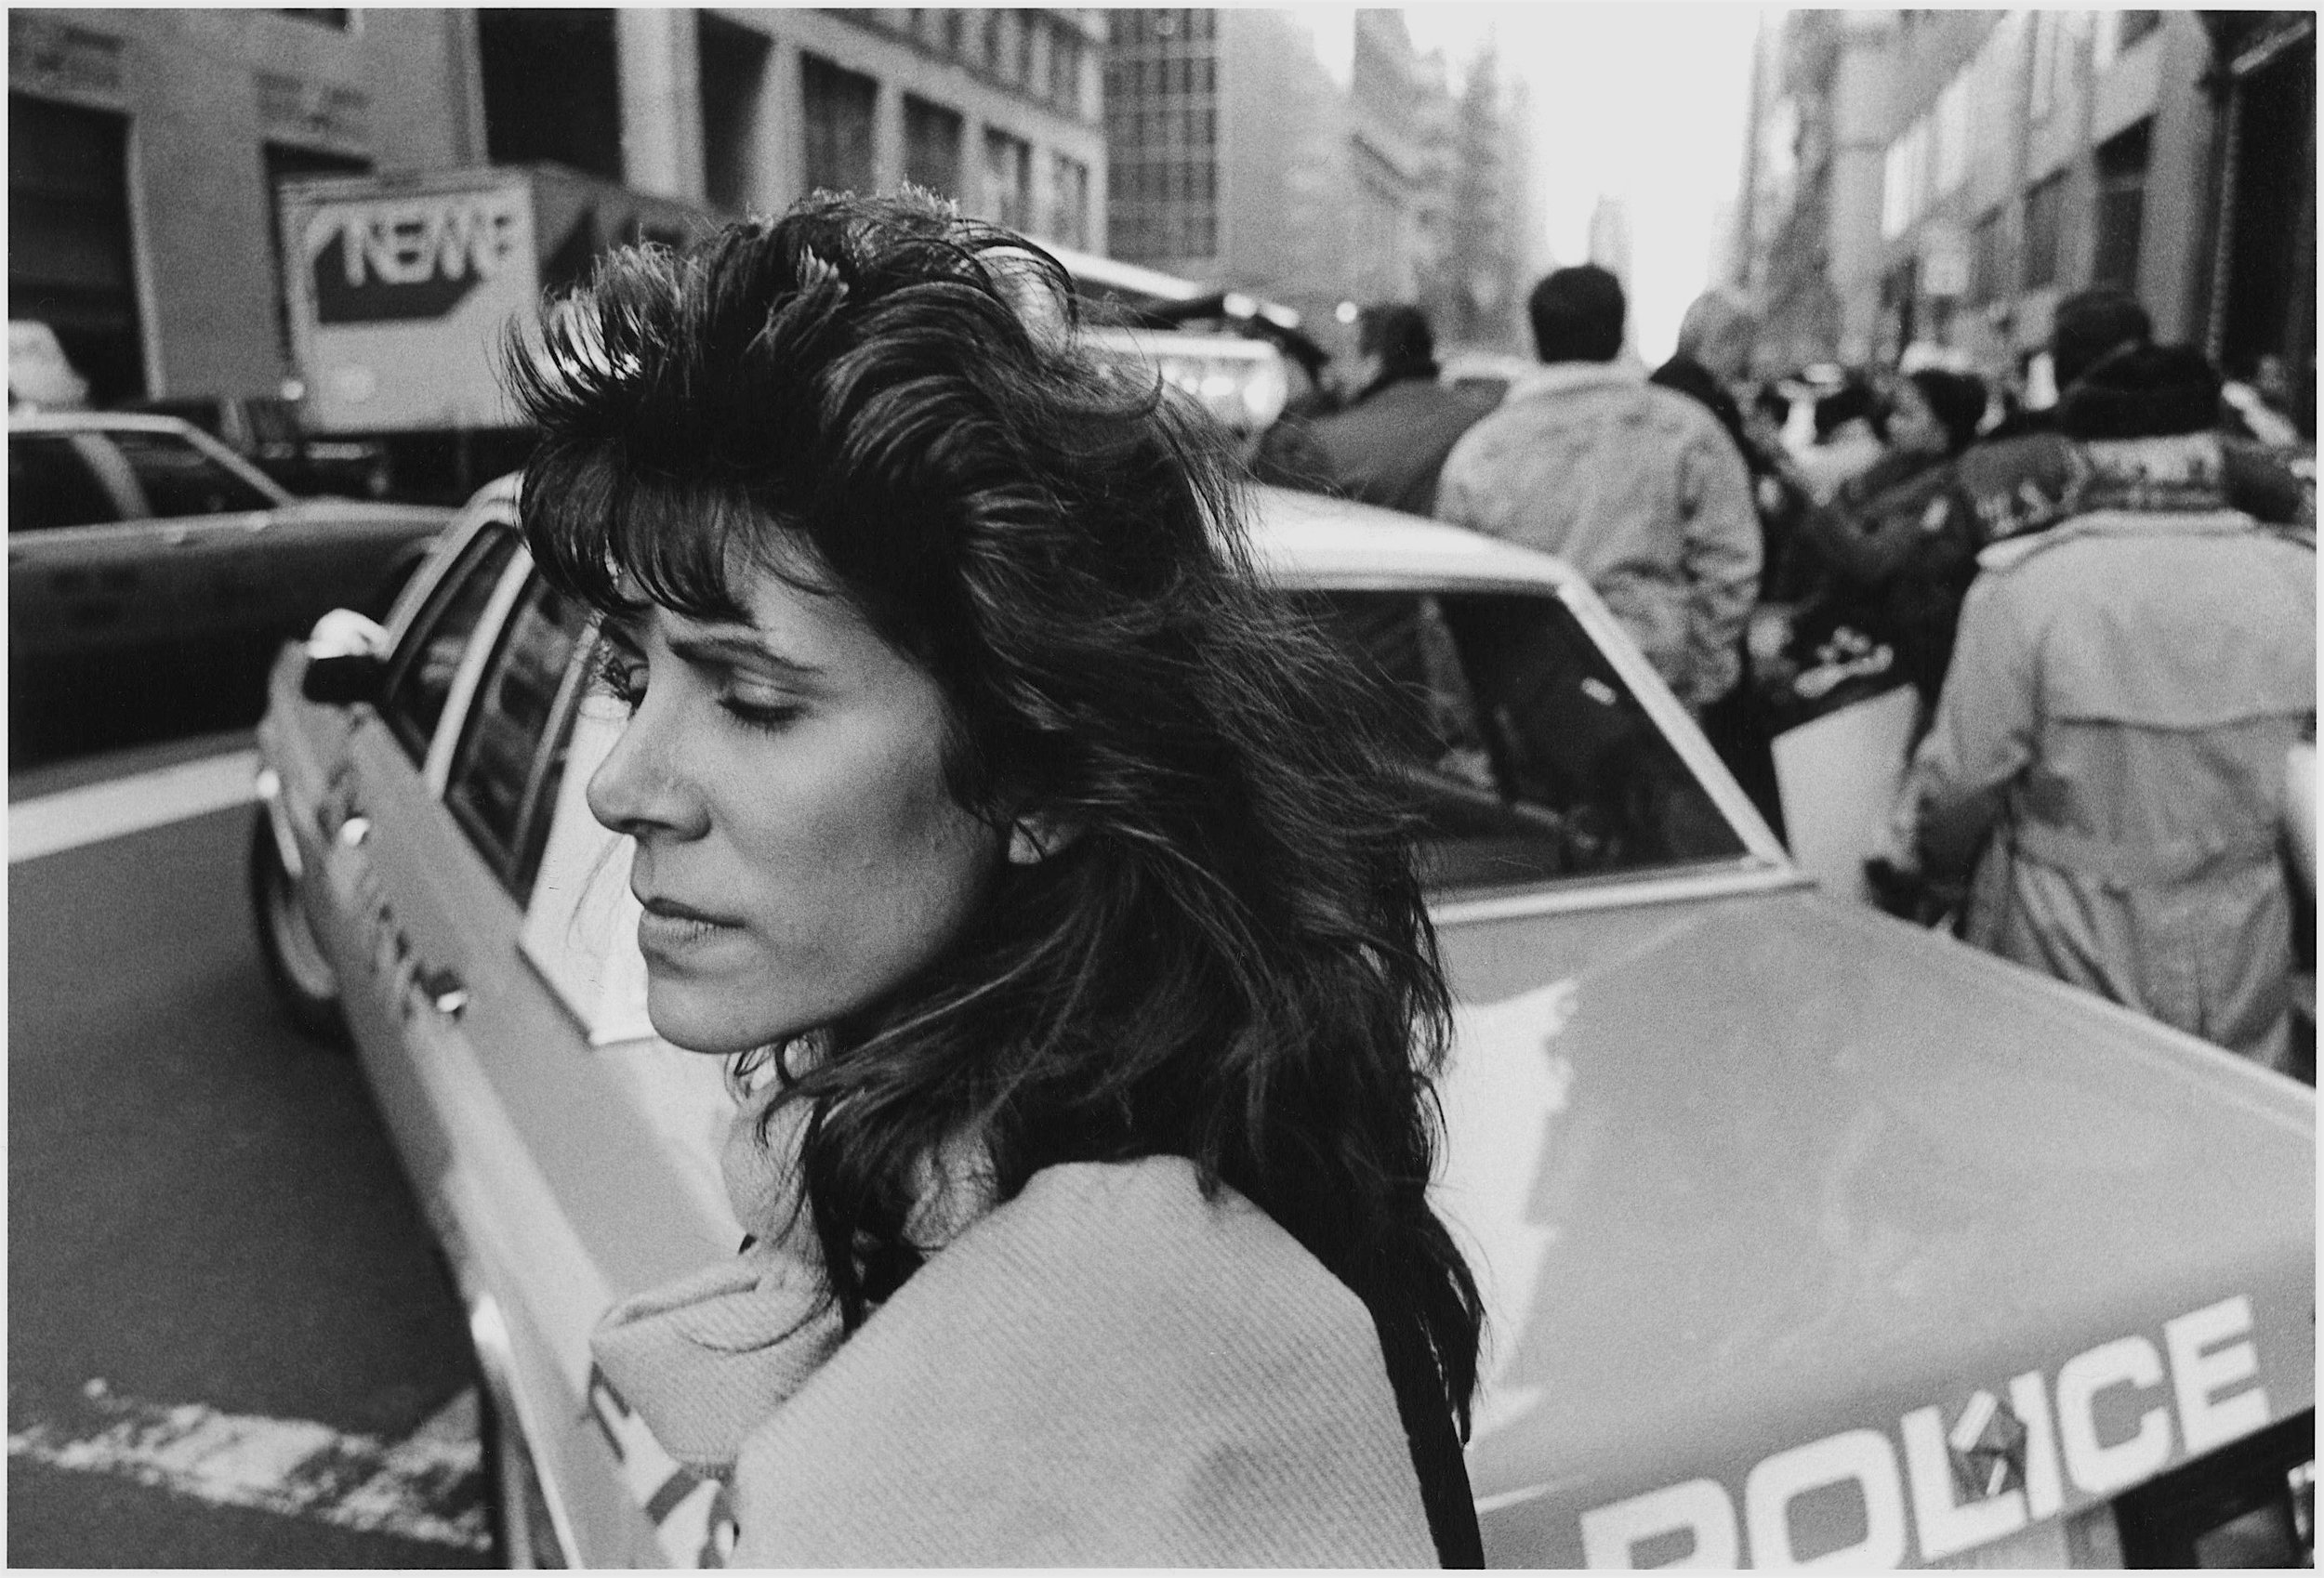 woman's eyes closed behind cop car, nyc, early 1980’s